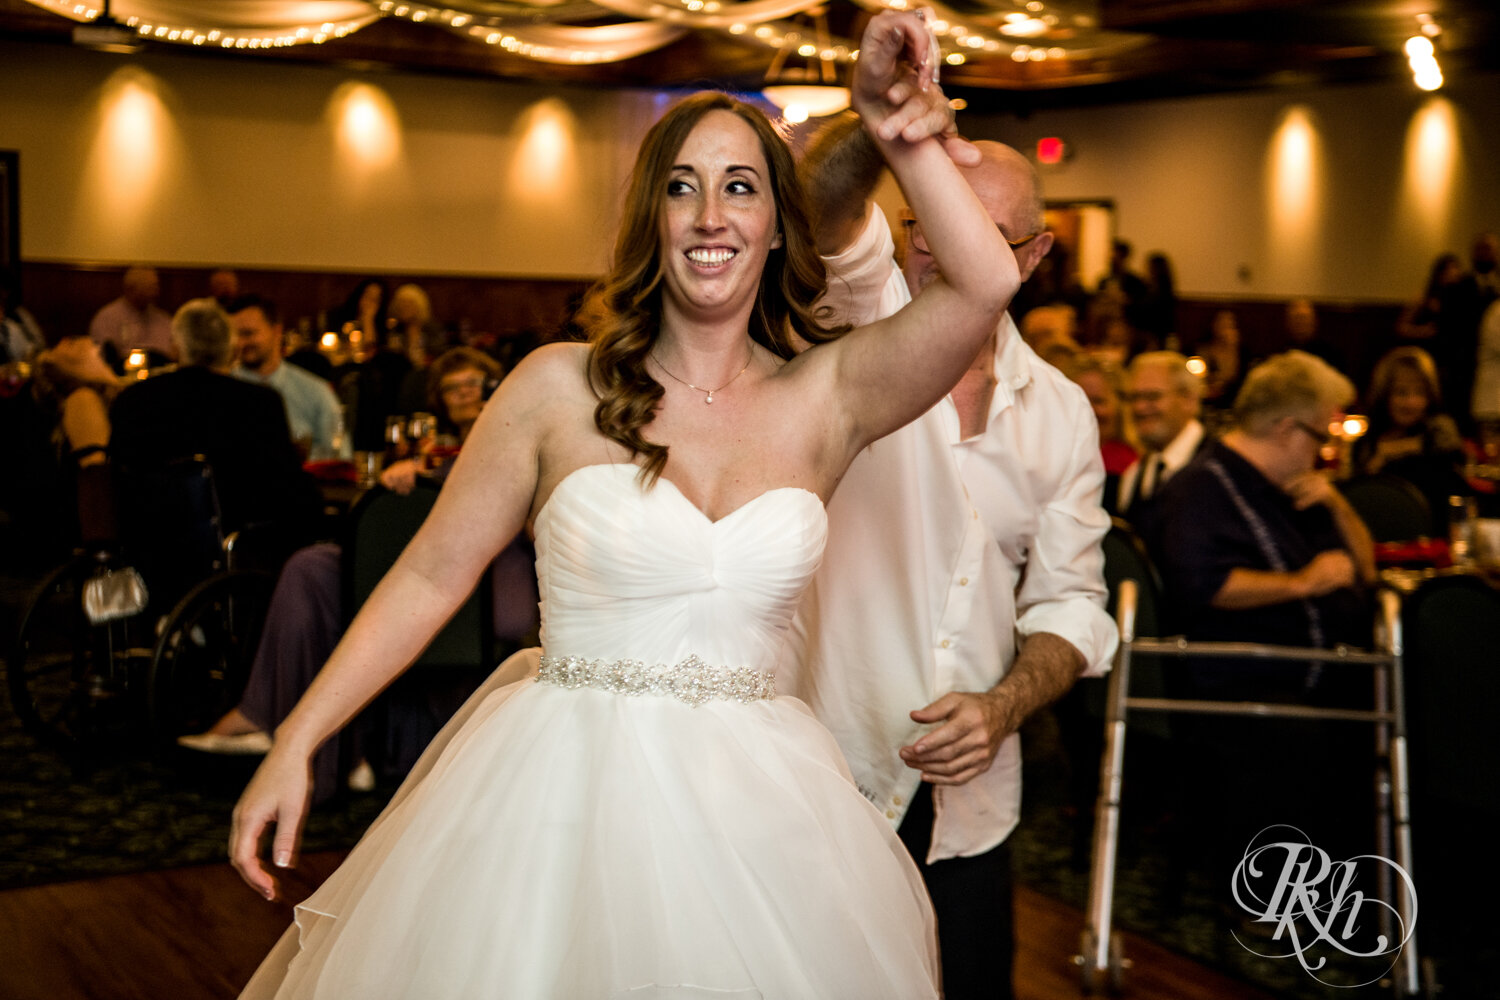 Bride and her dad dance at wedding reception at Rockwoods in Otsego, Minnesota.